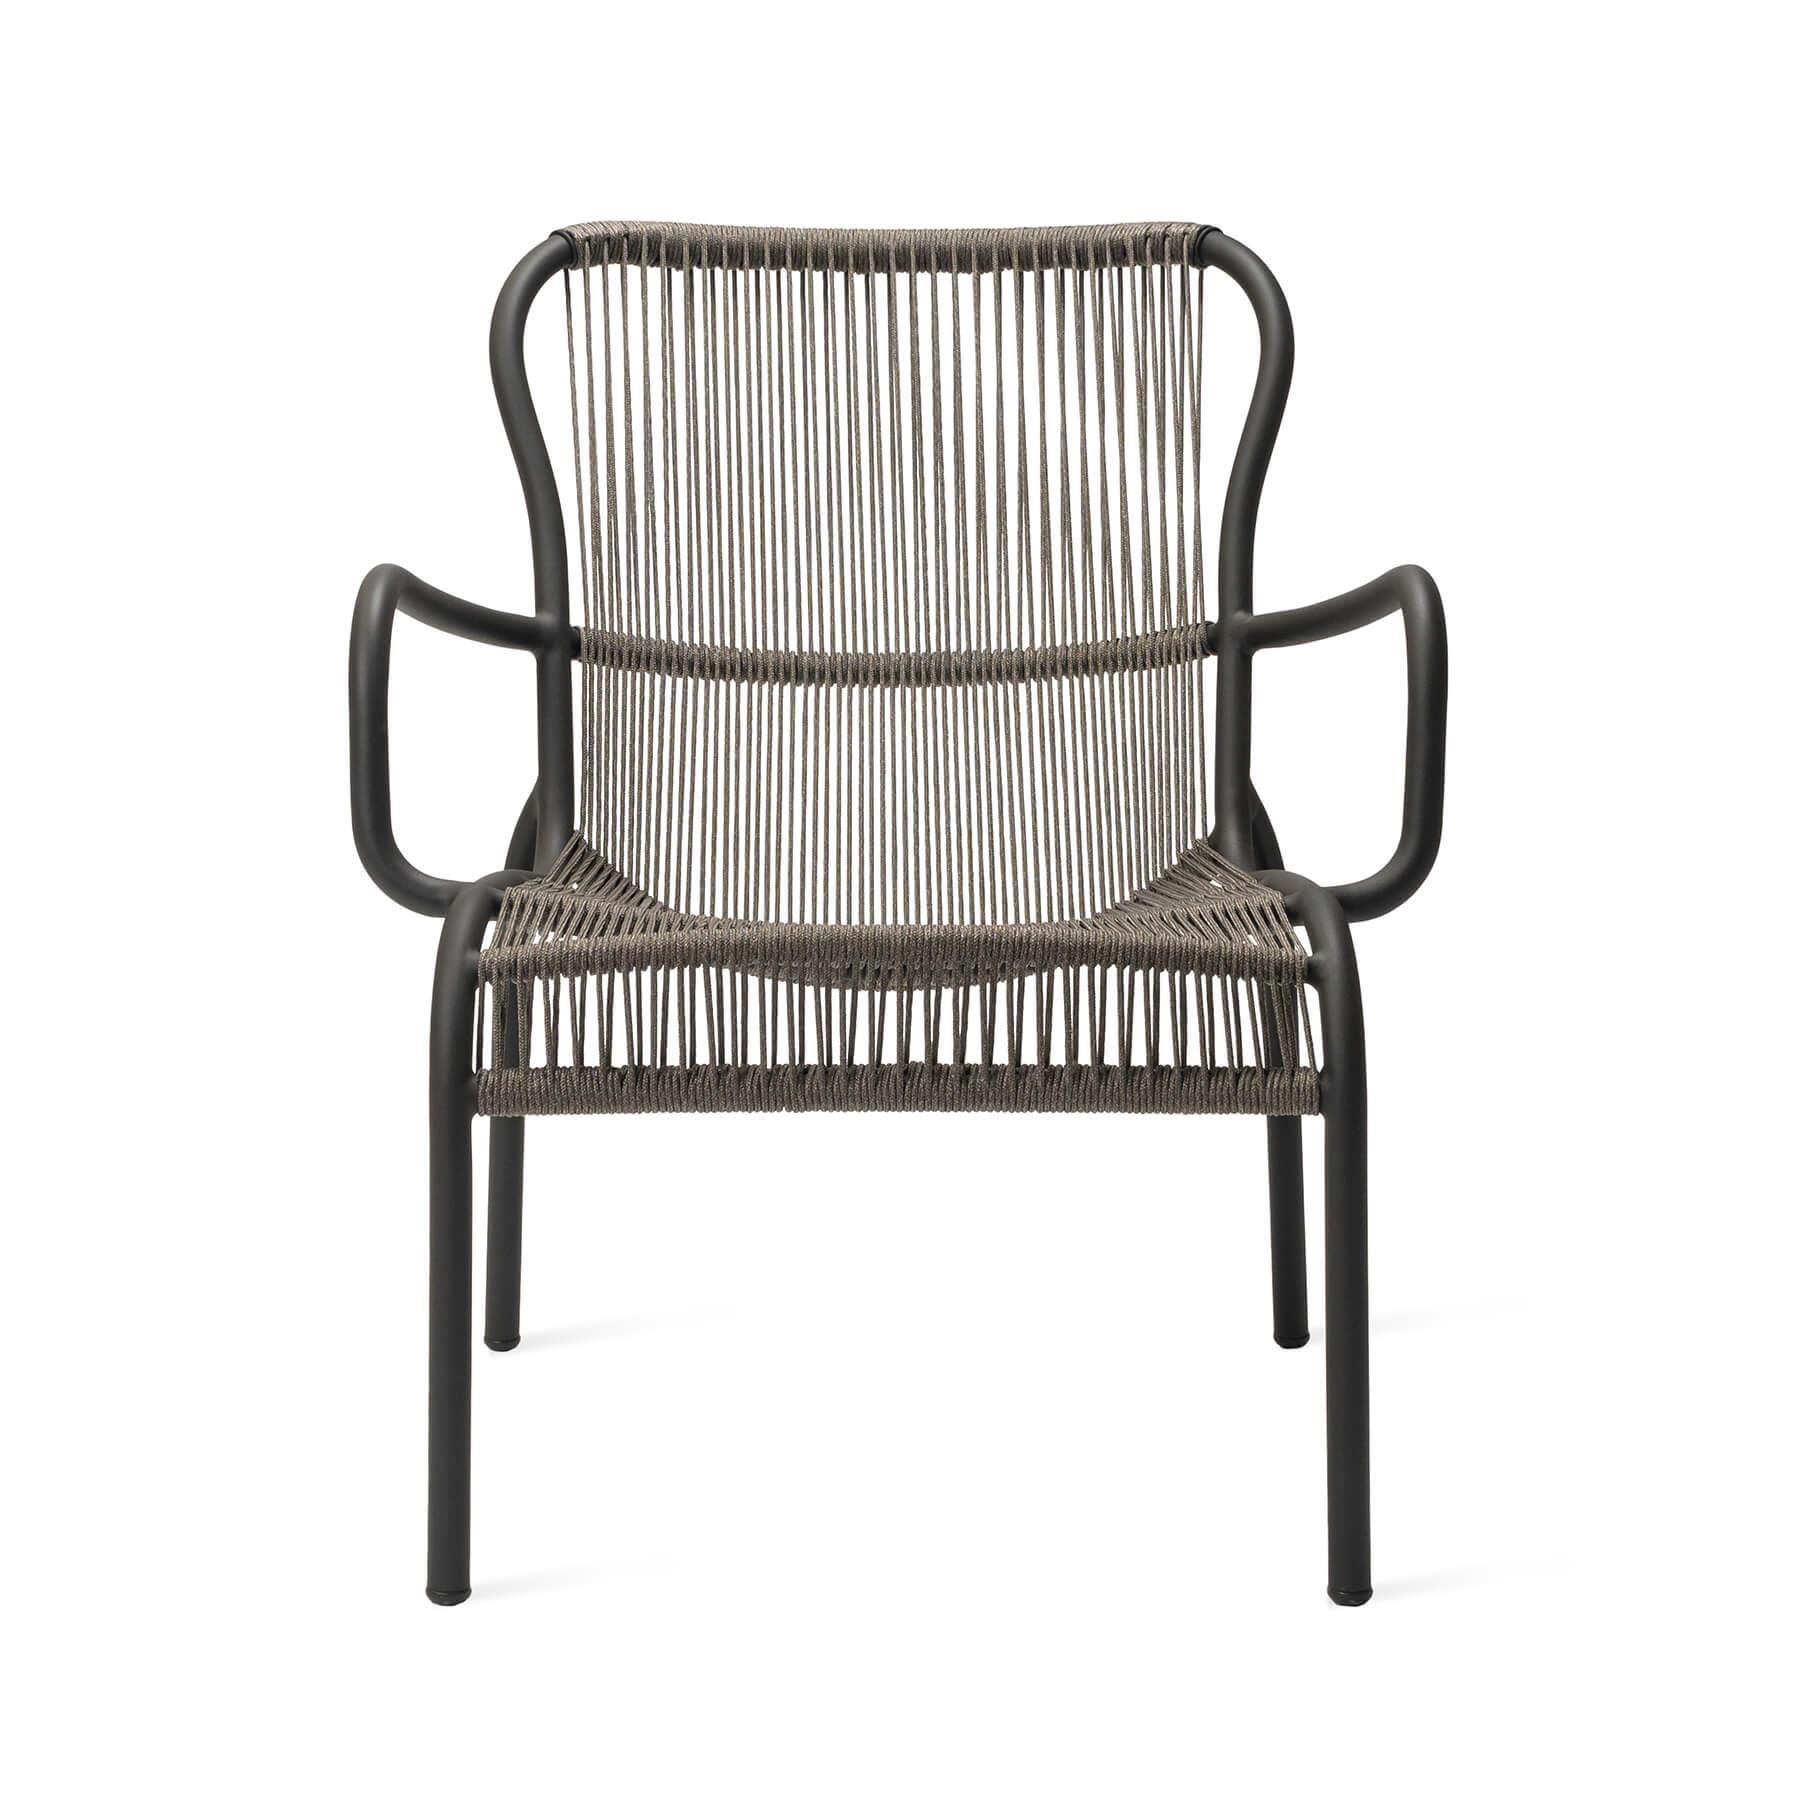 Vincent Sheppard Loop Garden Lounge Chair Fossil Grey Designer Furniture From Holloways Of Ludlow